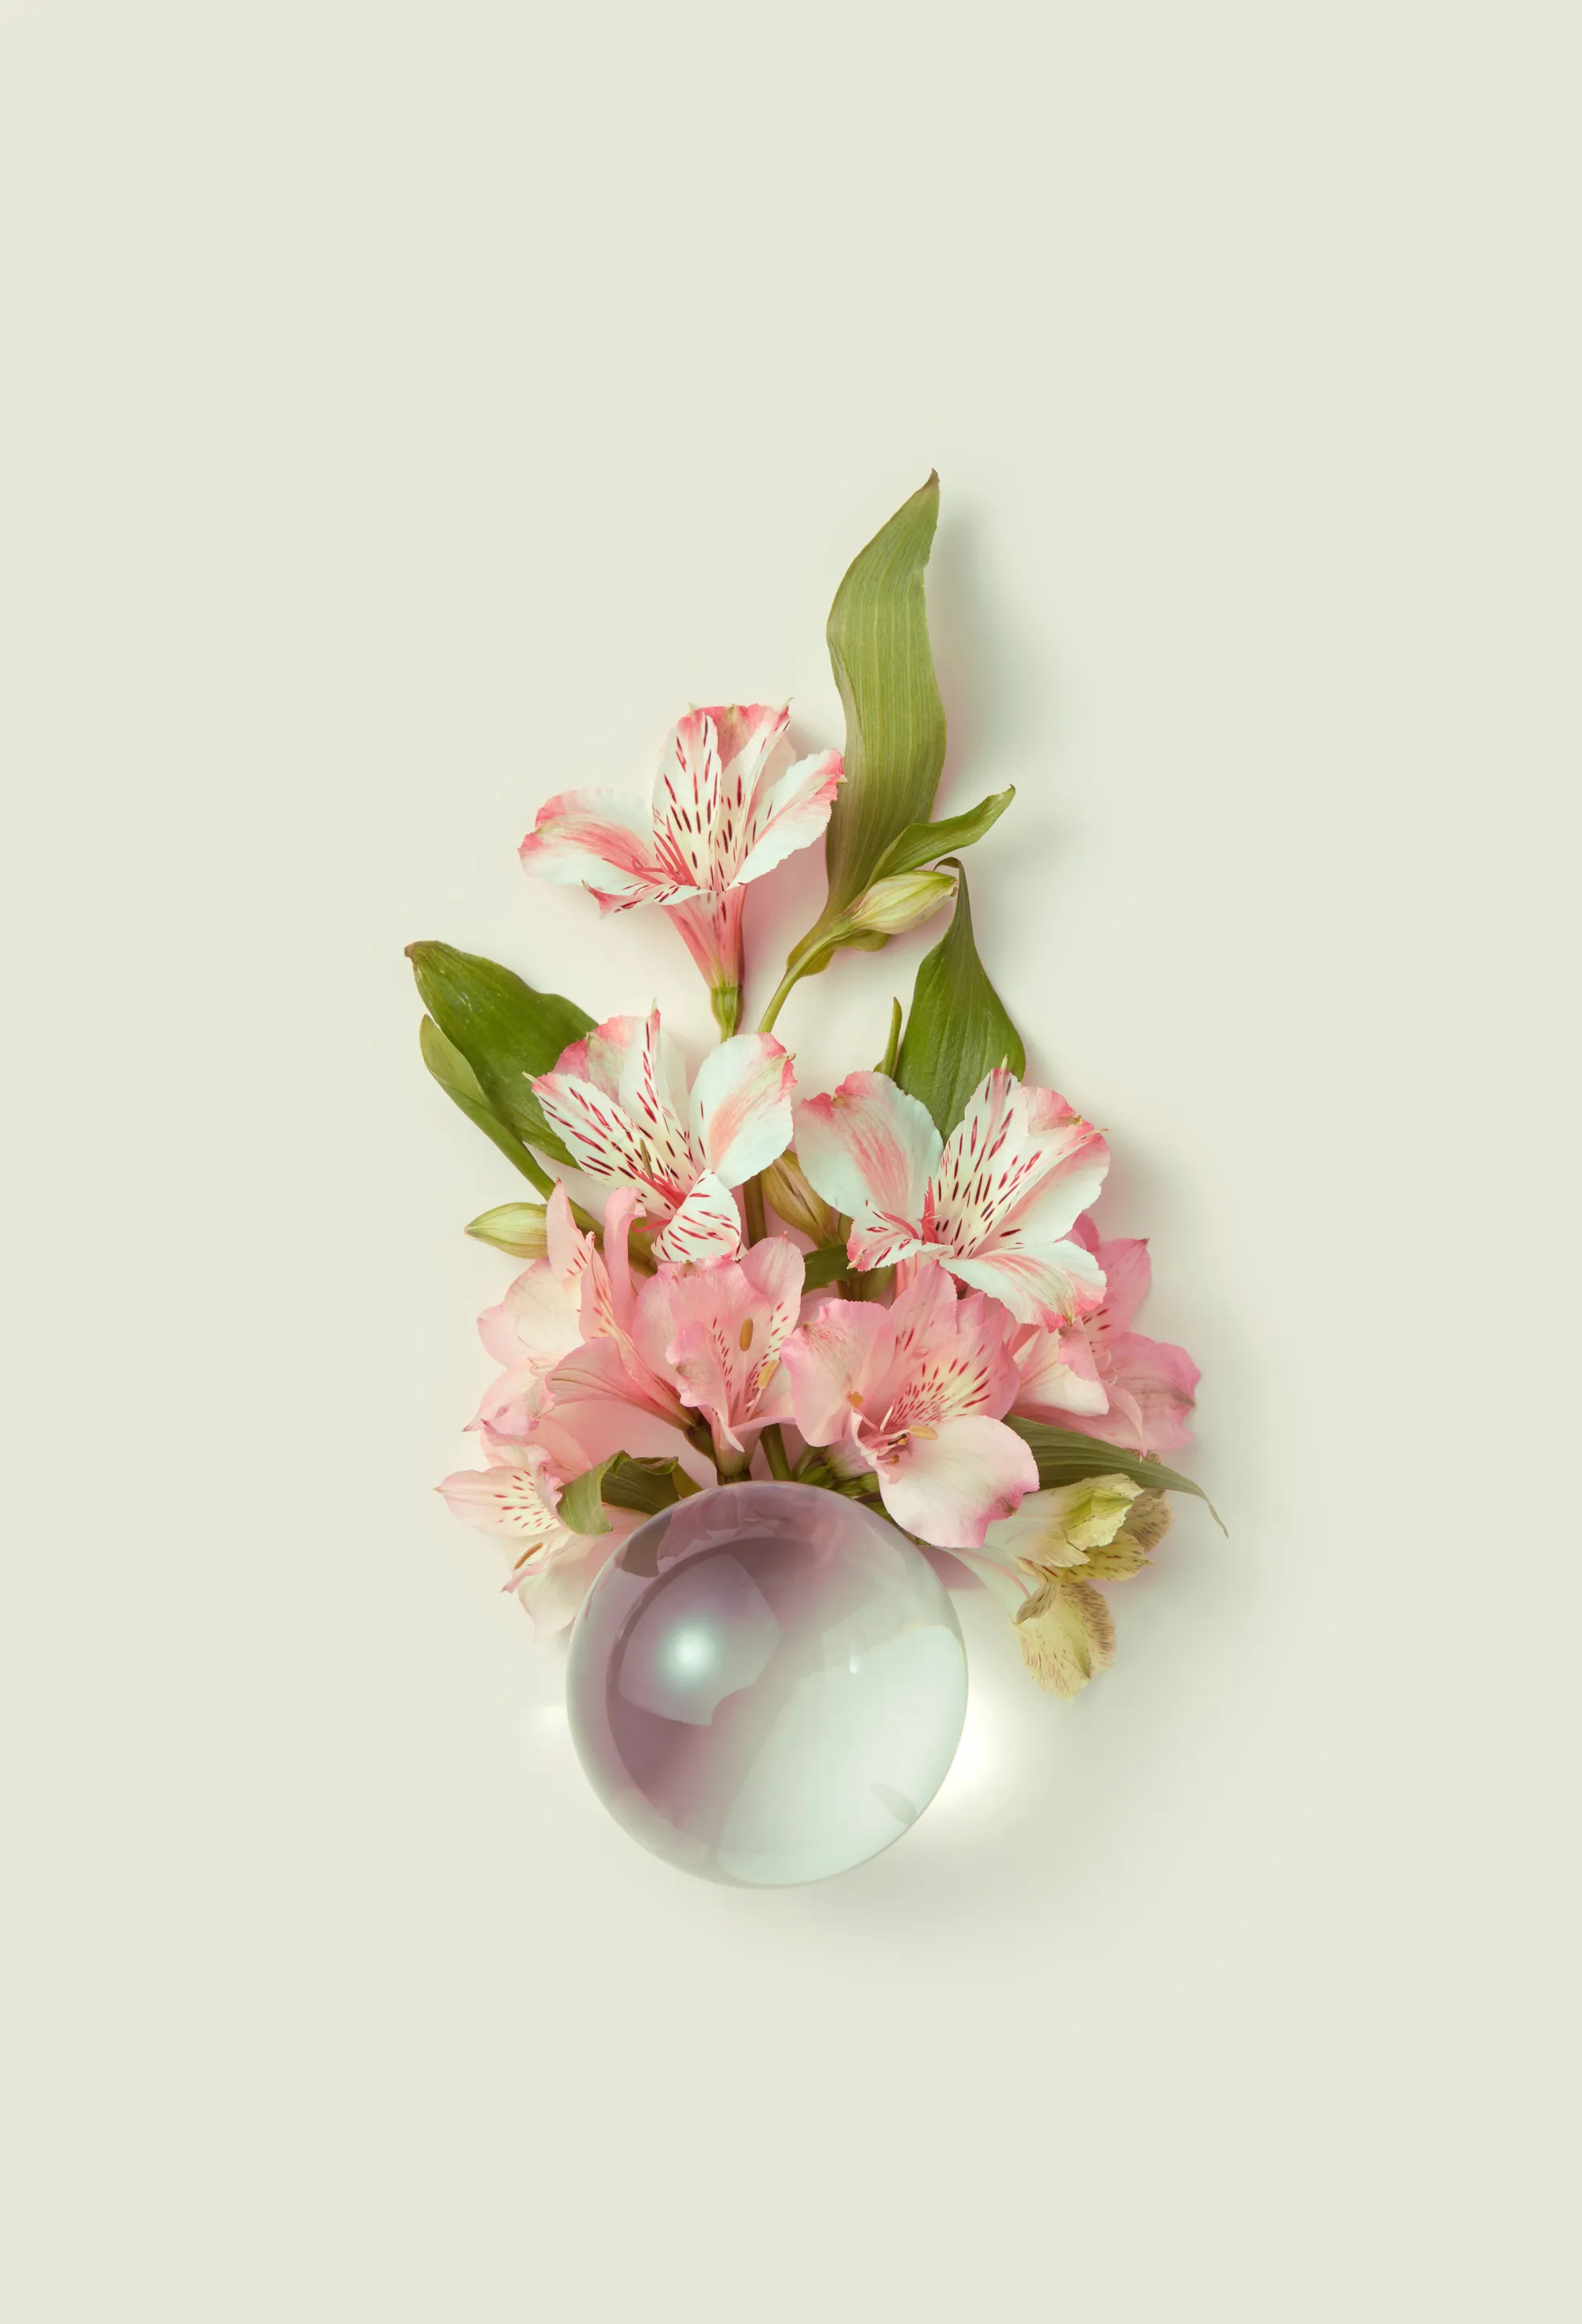 Alstroemeria flowers with pink petals and intricate markings, partially magnified by a glass ball on a pale background.